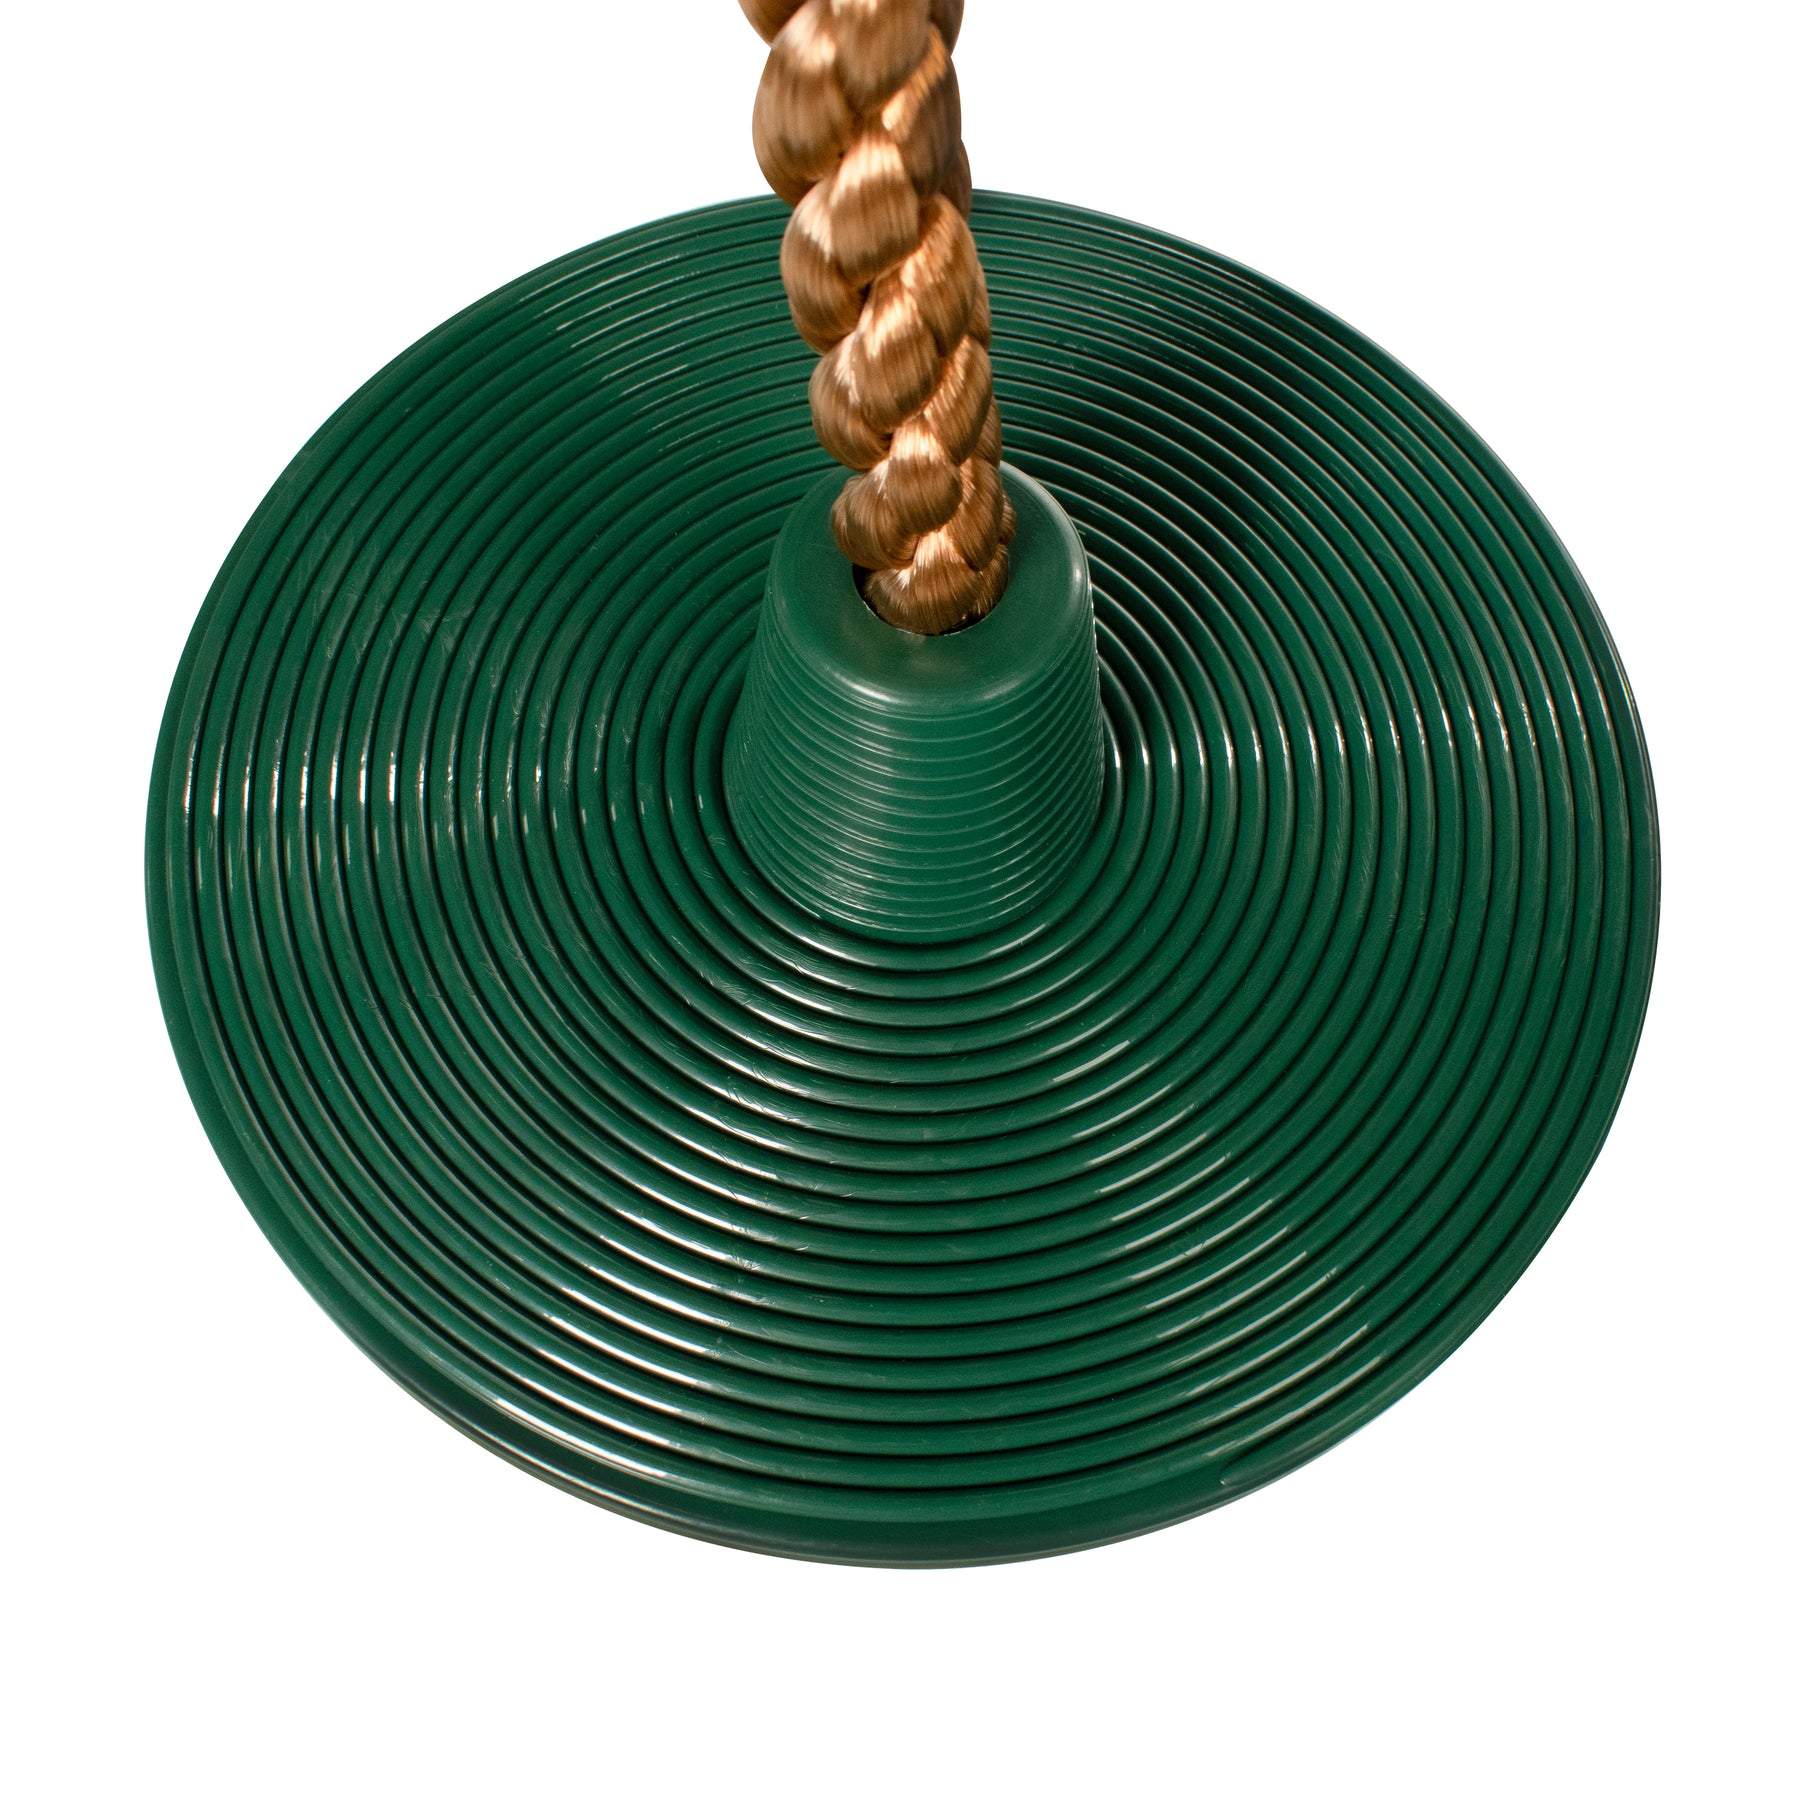 Close-up of the base for the Bliss Outdoors Rope Climber Swing, showing the grooves for better grip.